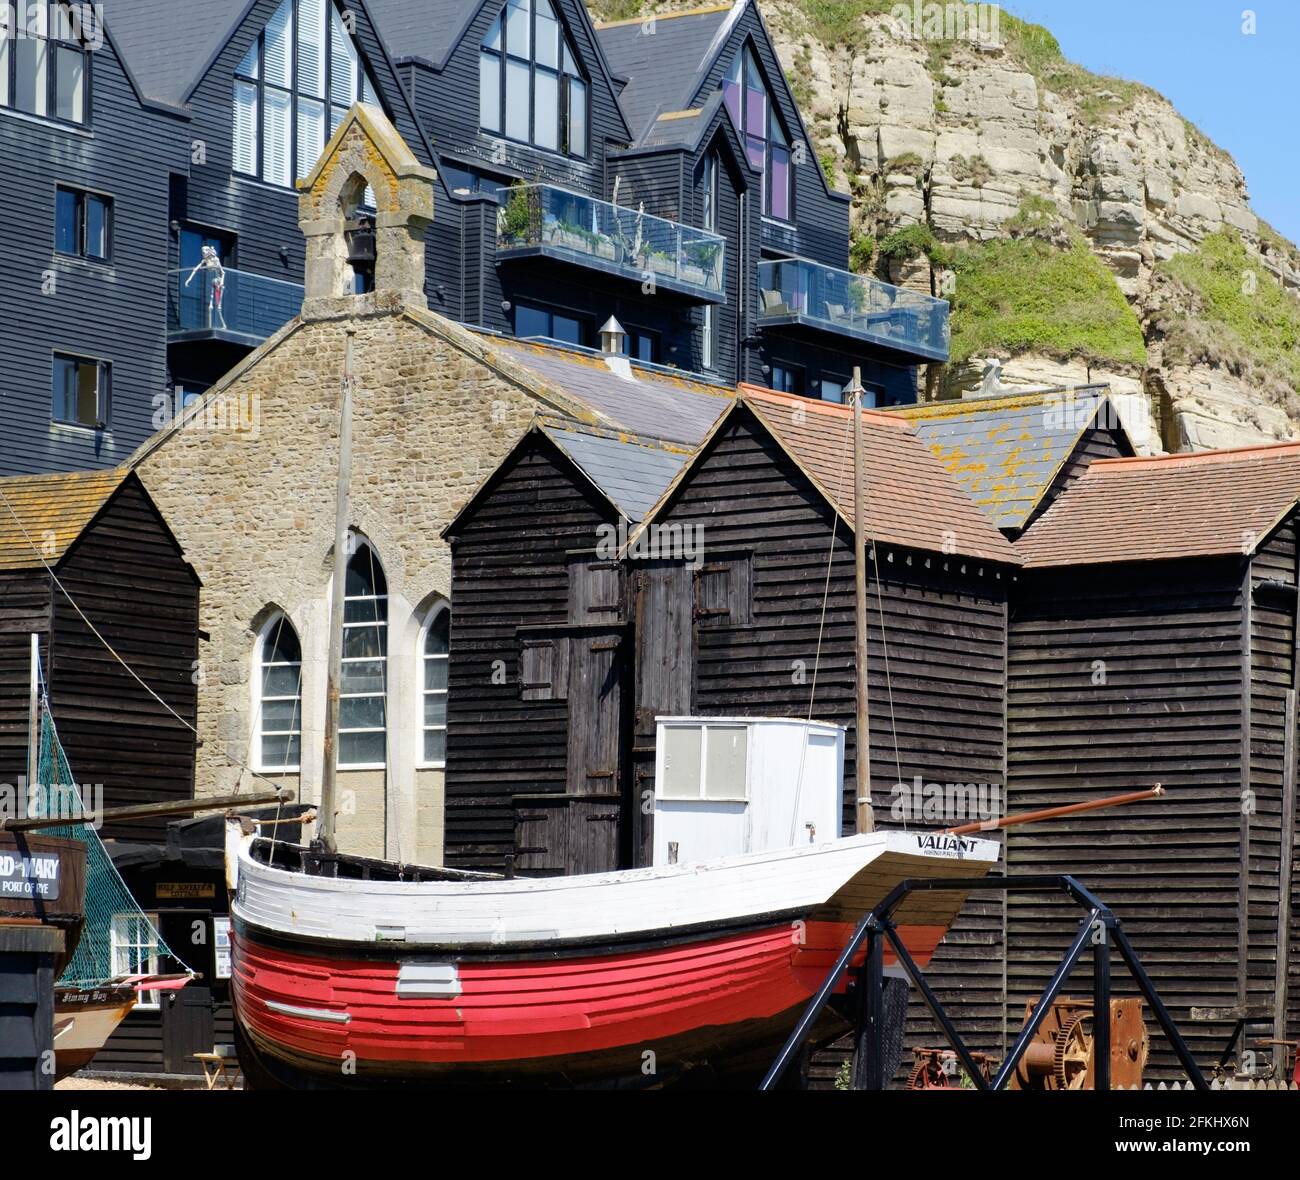 Staycation idea. The Stade Hastings, old fishing boat Valiant, Net Shops & Fisherman’s Museum. Townhouses & Hastings Country Park sandstone cliffs. Stock Photo